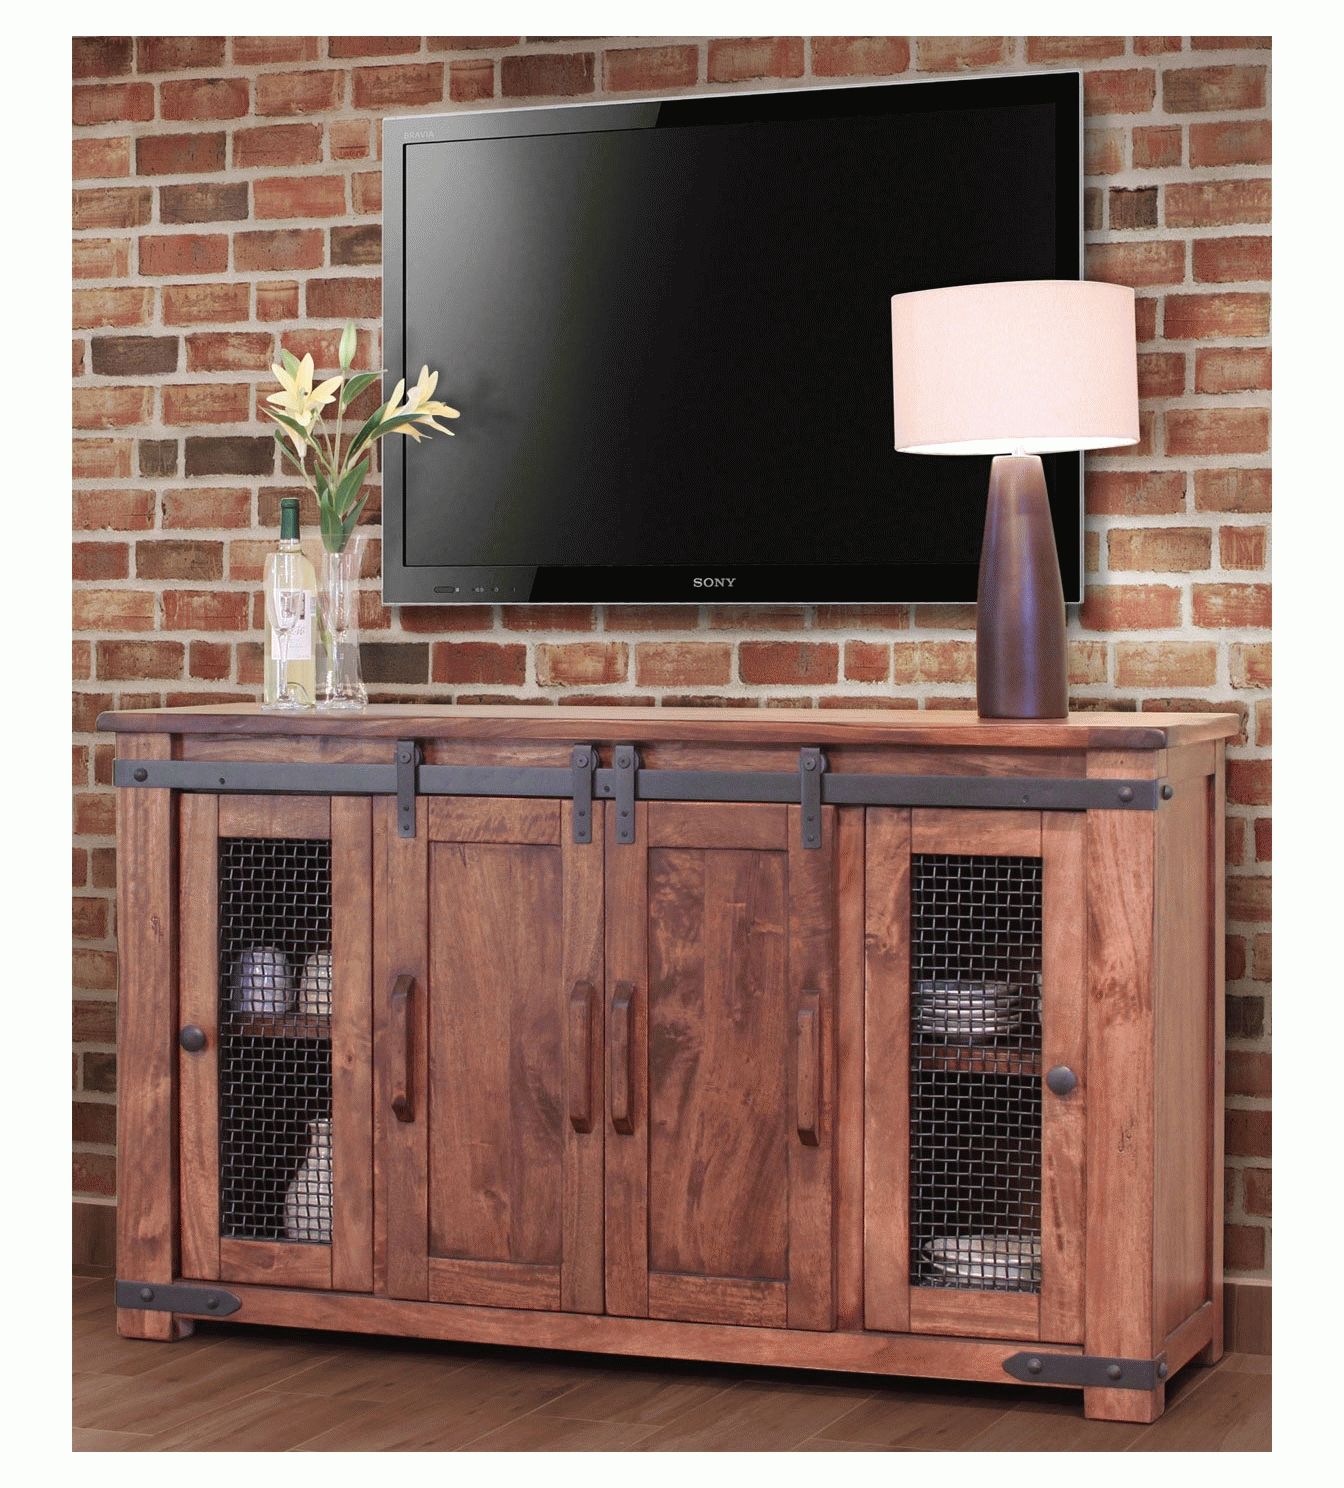 Rustic Barn Door Tv Stand, Barn Door Tv Stand, Barn Door Tv Console With Regard To Cabinet Tv Stands (View 3 of 15)